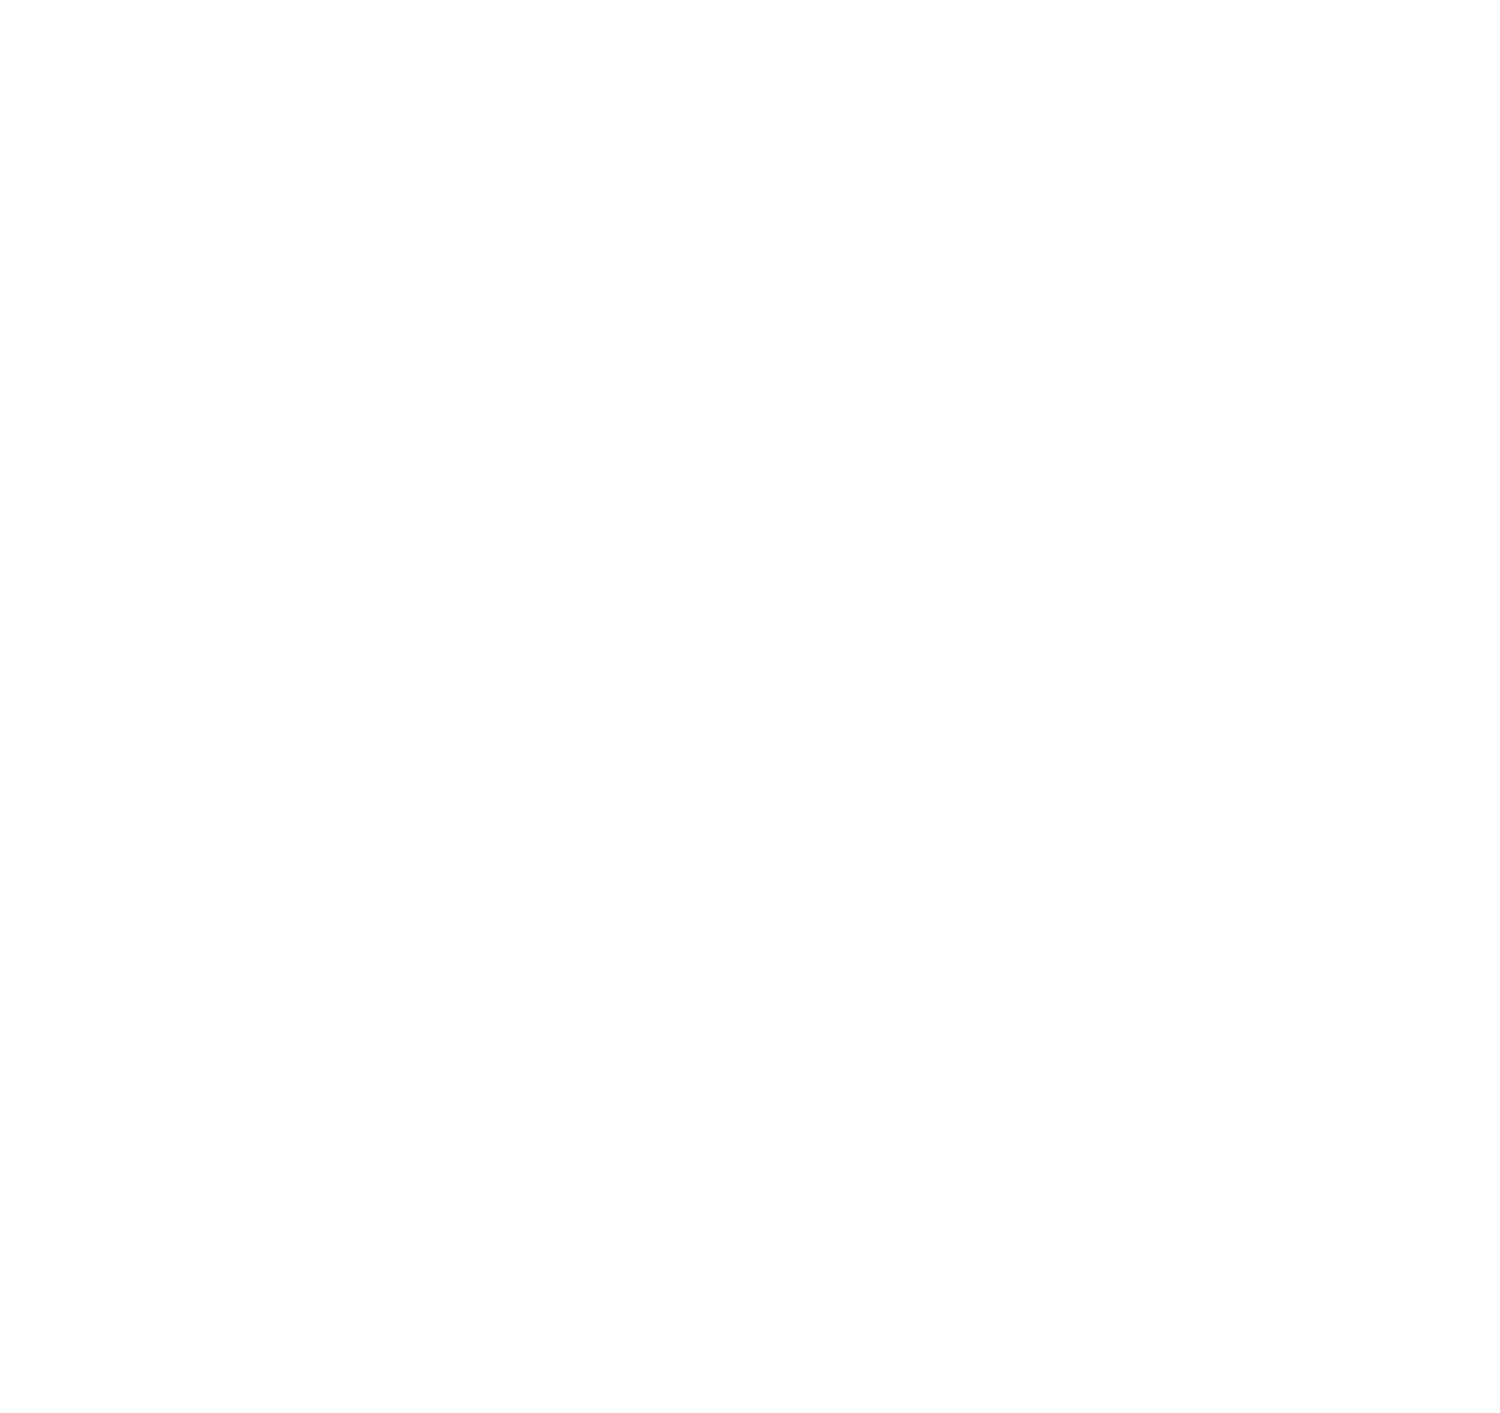 Central Texas Winery & Vineyard & Specialty Property Advising